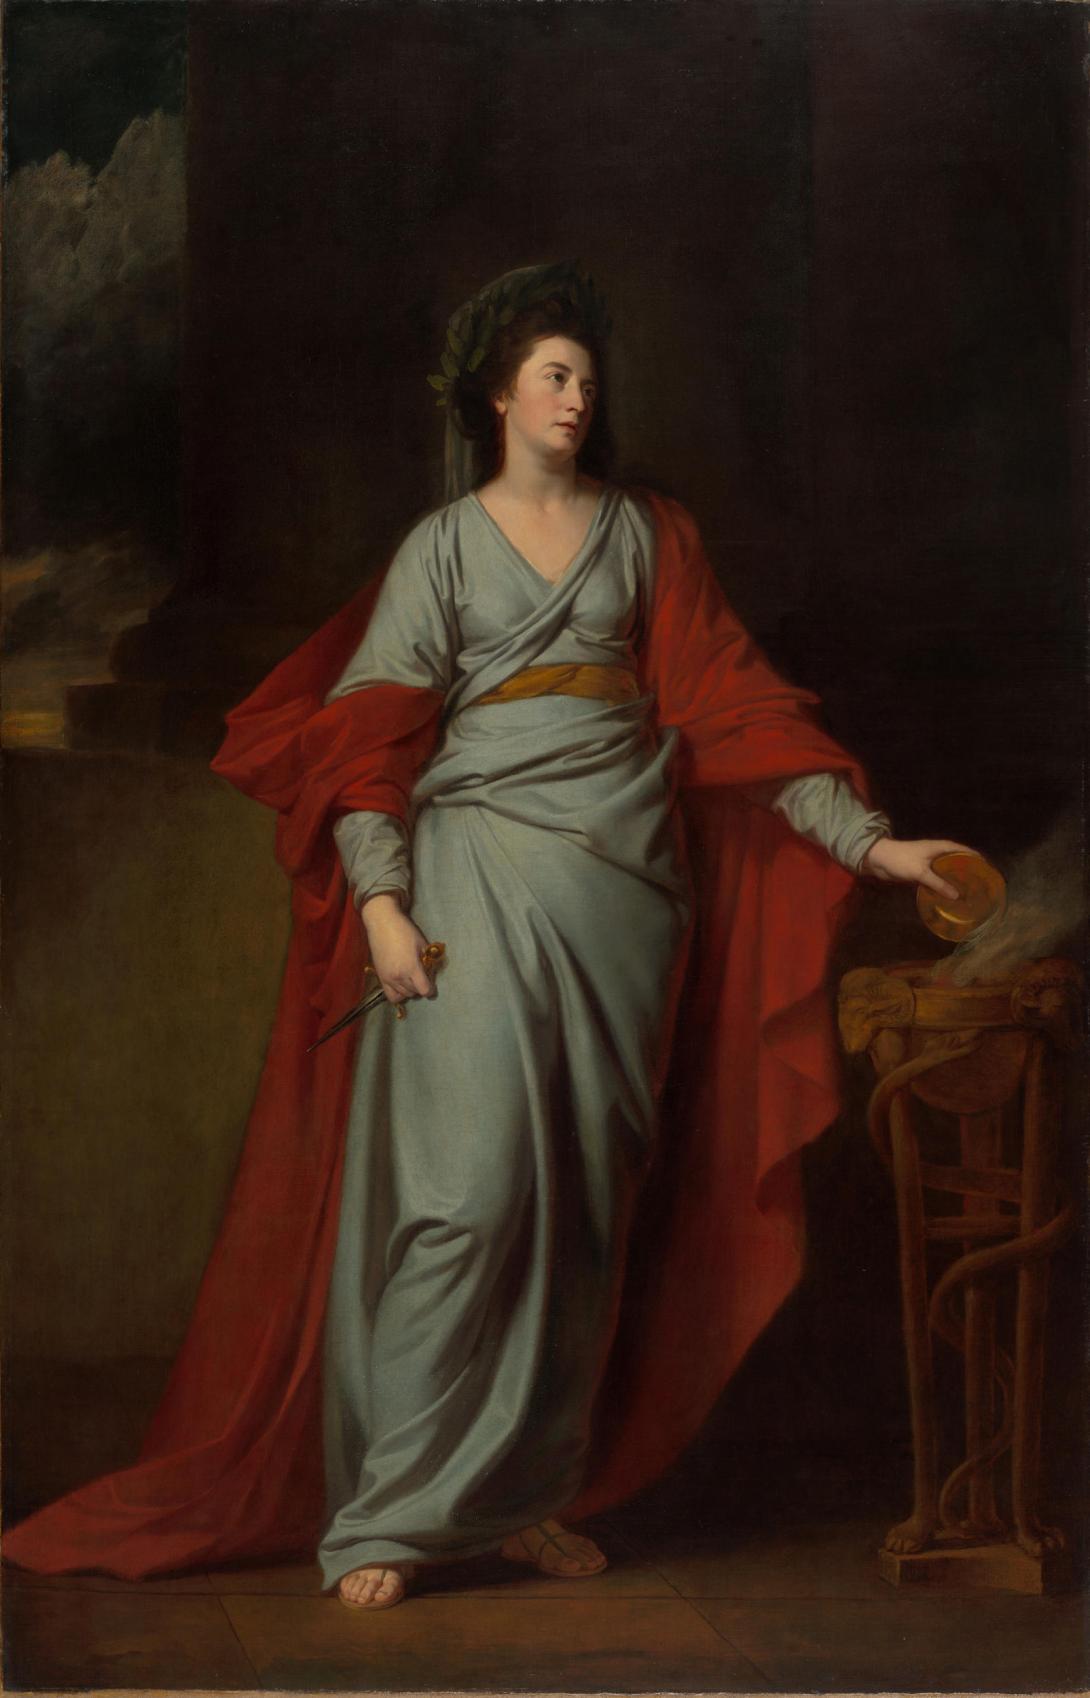 An oil painting of a woman in a blue dress and red robe.